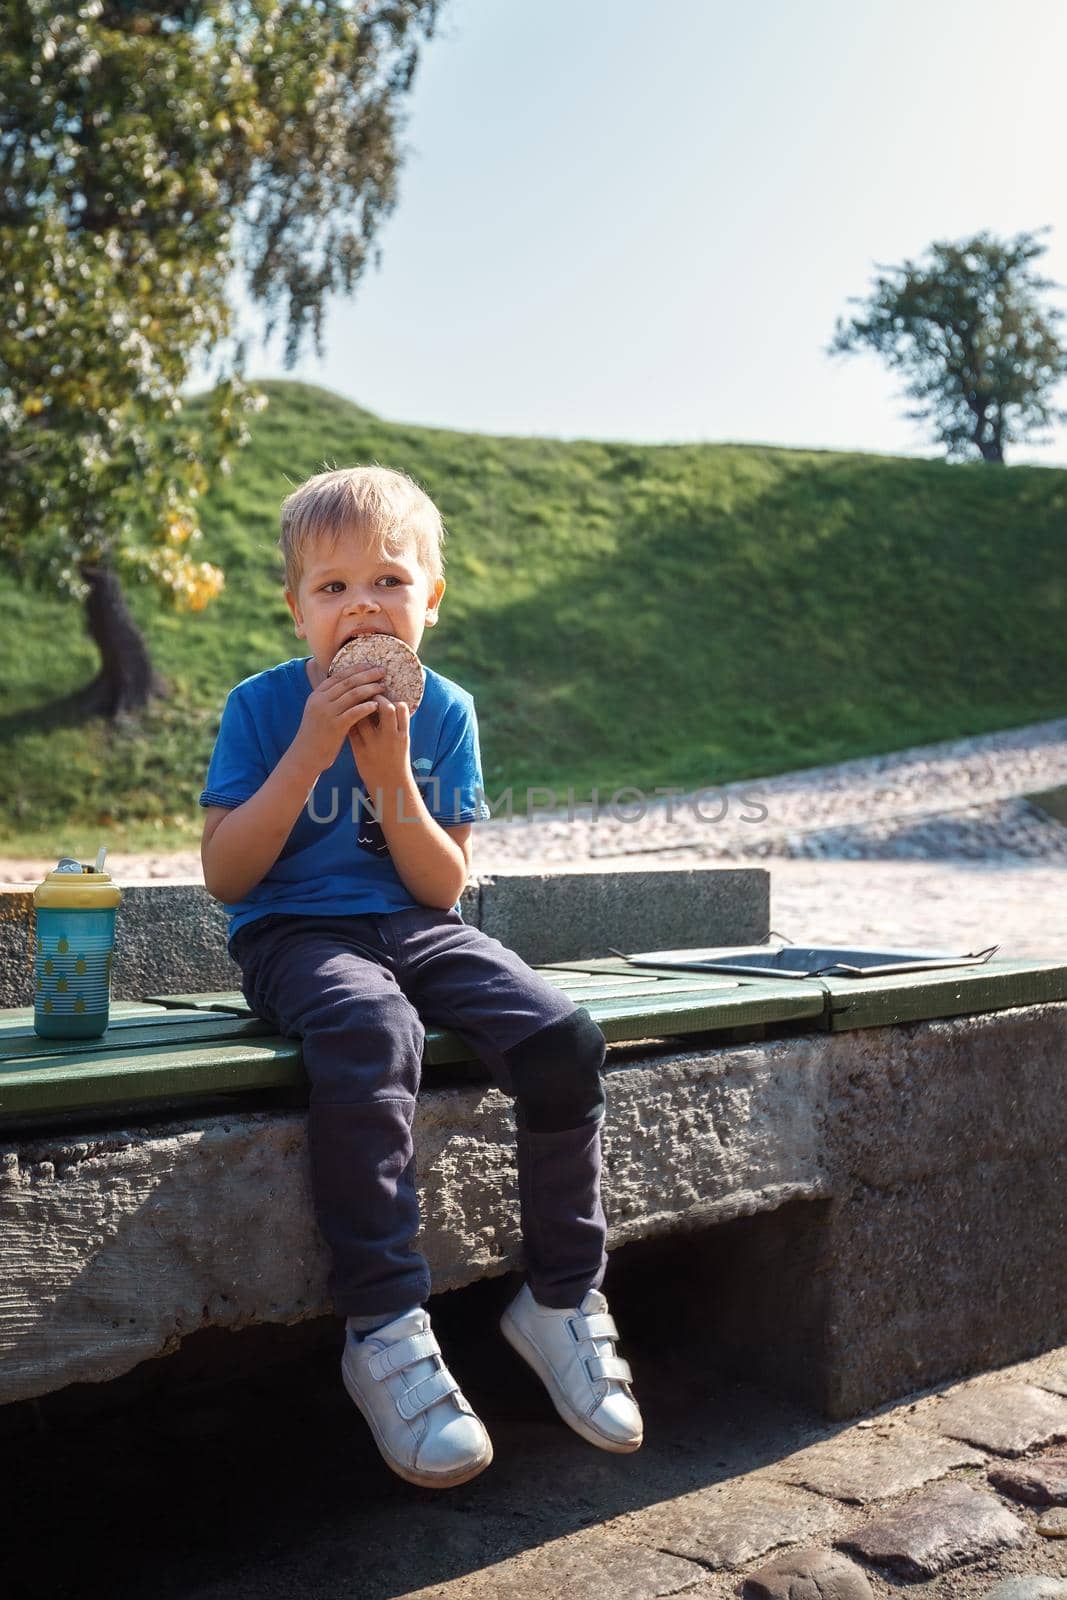 Adorable baby boy eat biscuit or cookie sitting on wooden bench at outdoor park. Happy kid enjoying with food, he licks the chocolate and smears his nose by Lincikas